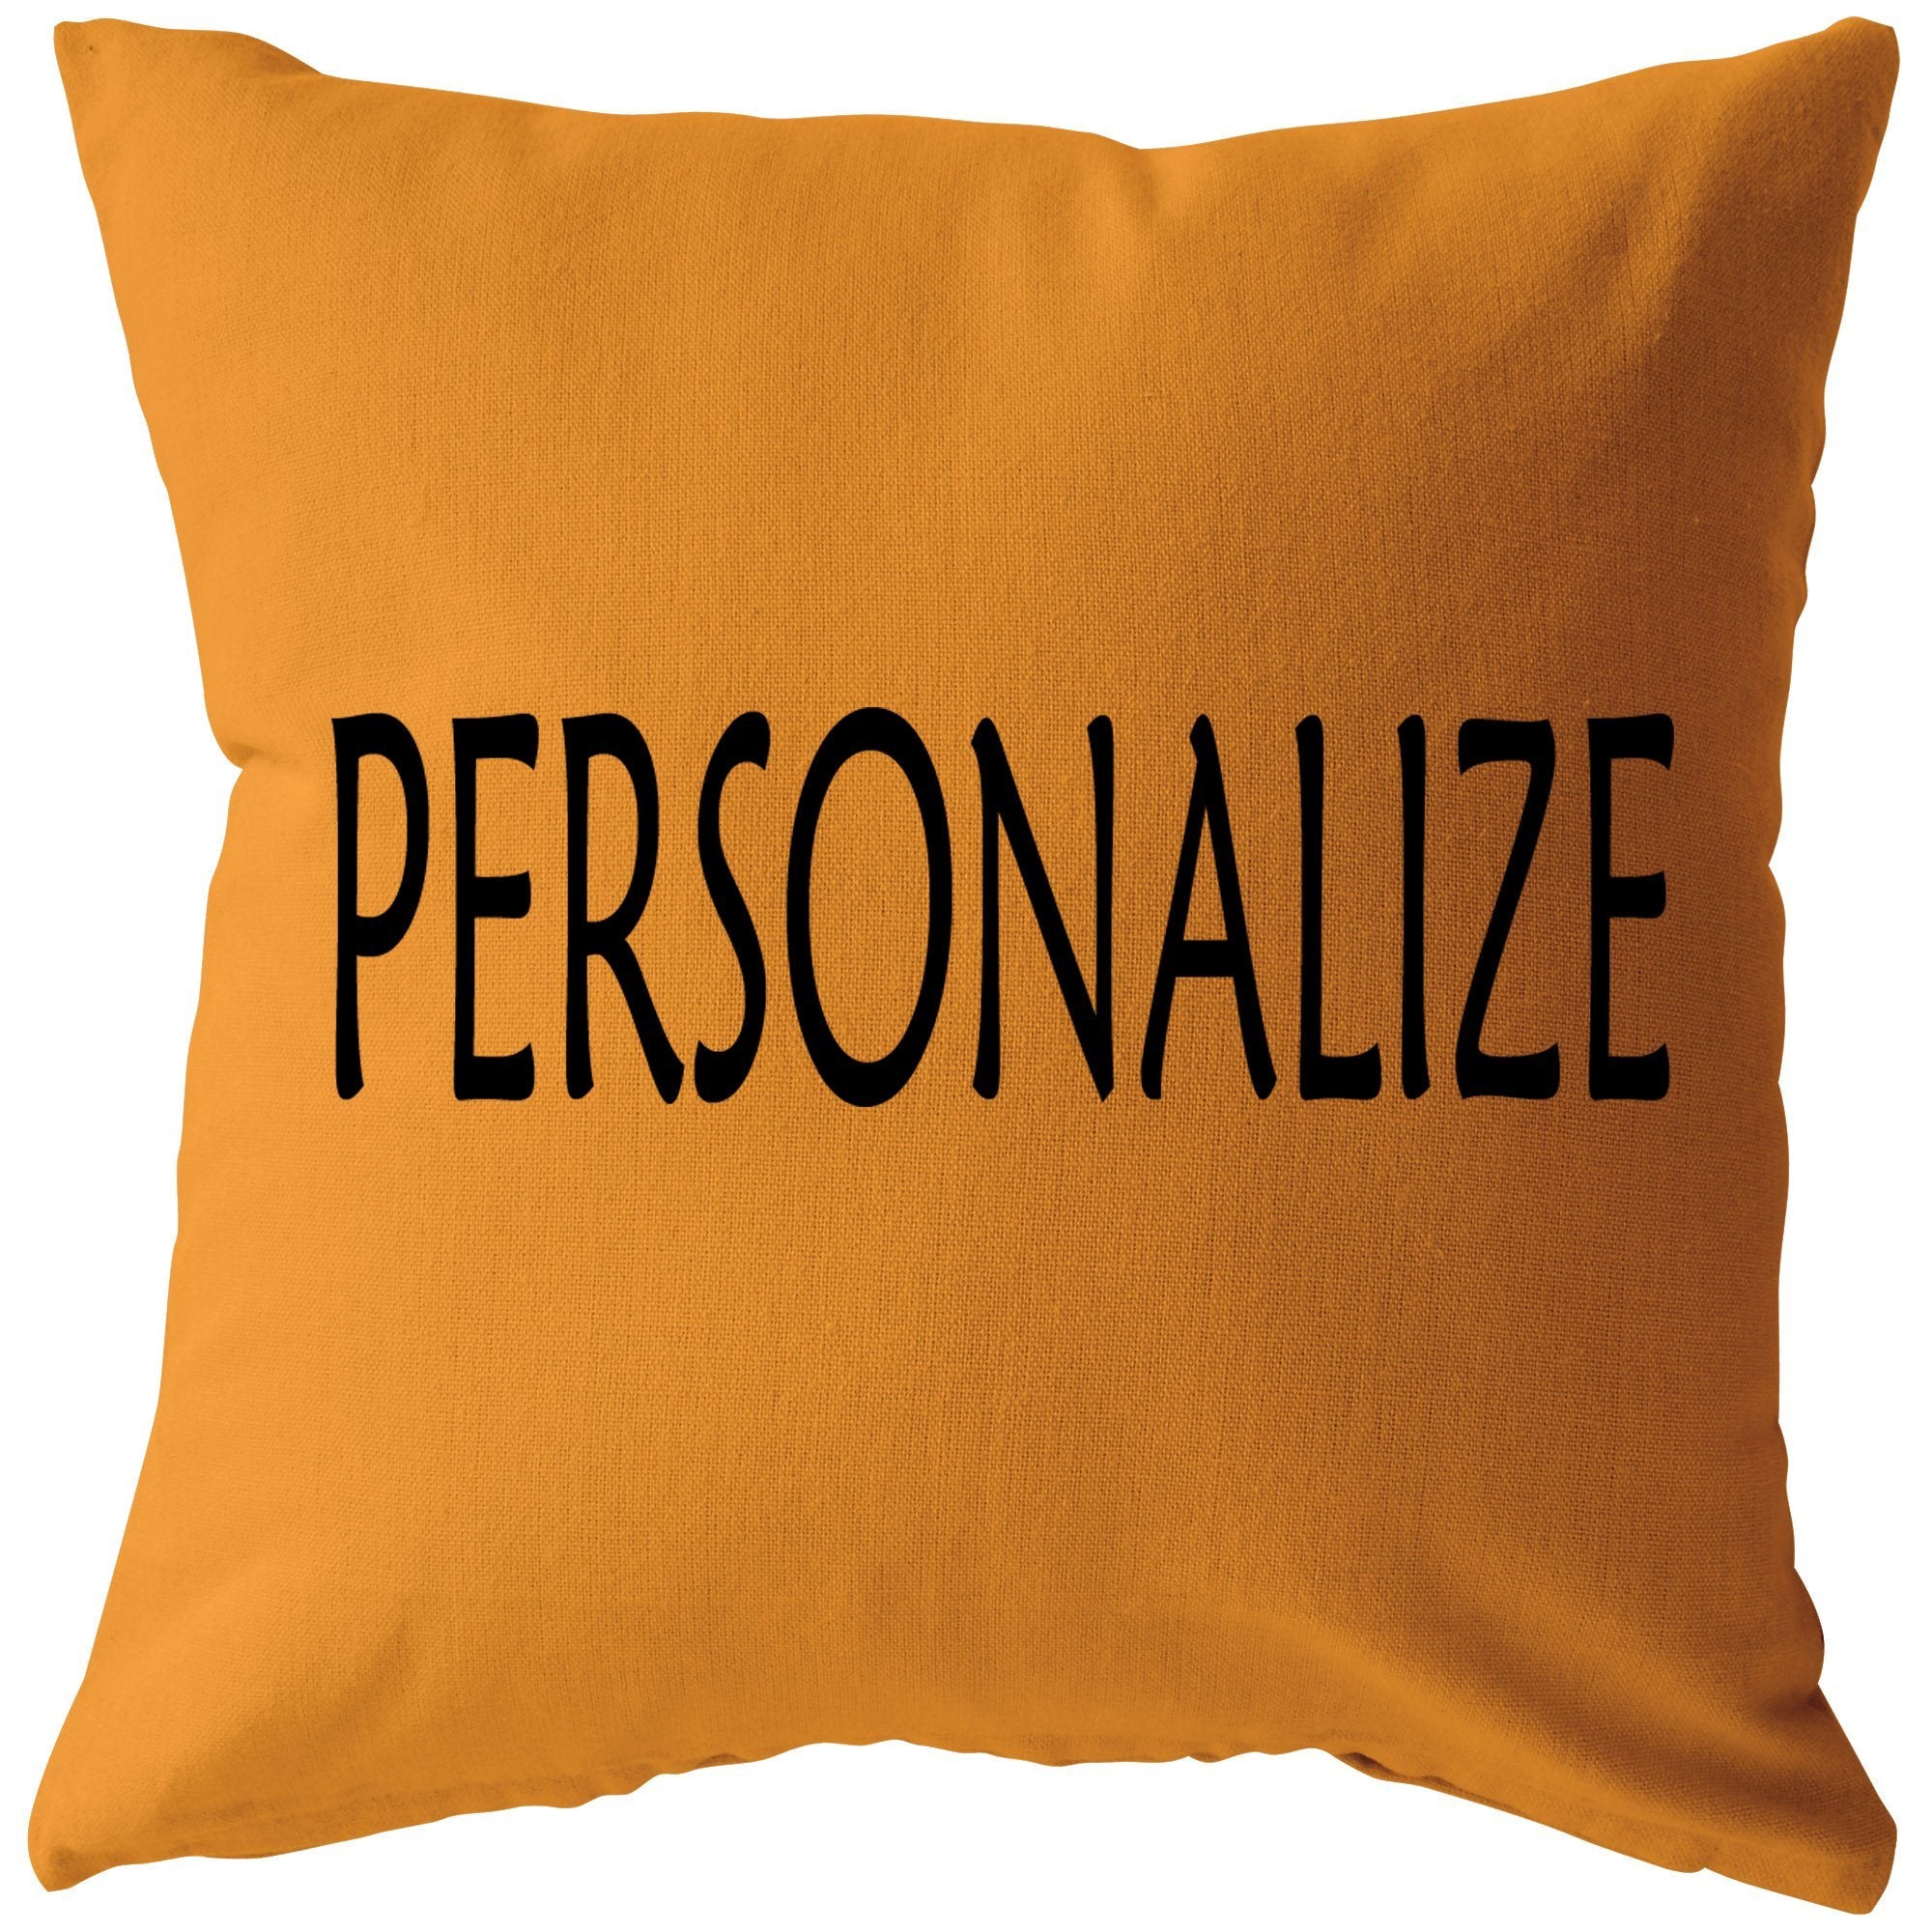 "Personalize Pillow"- Customized Your Nickname or your own Design.